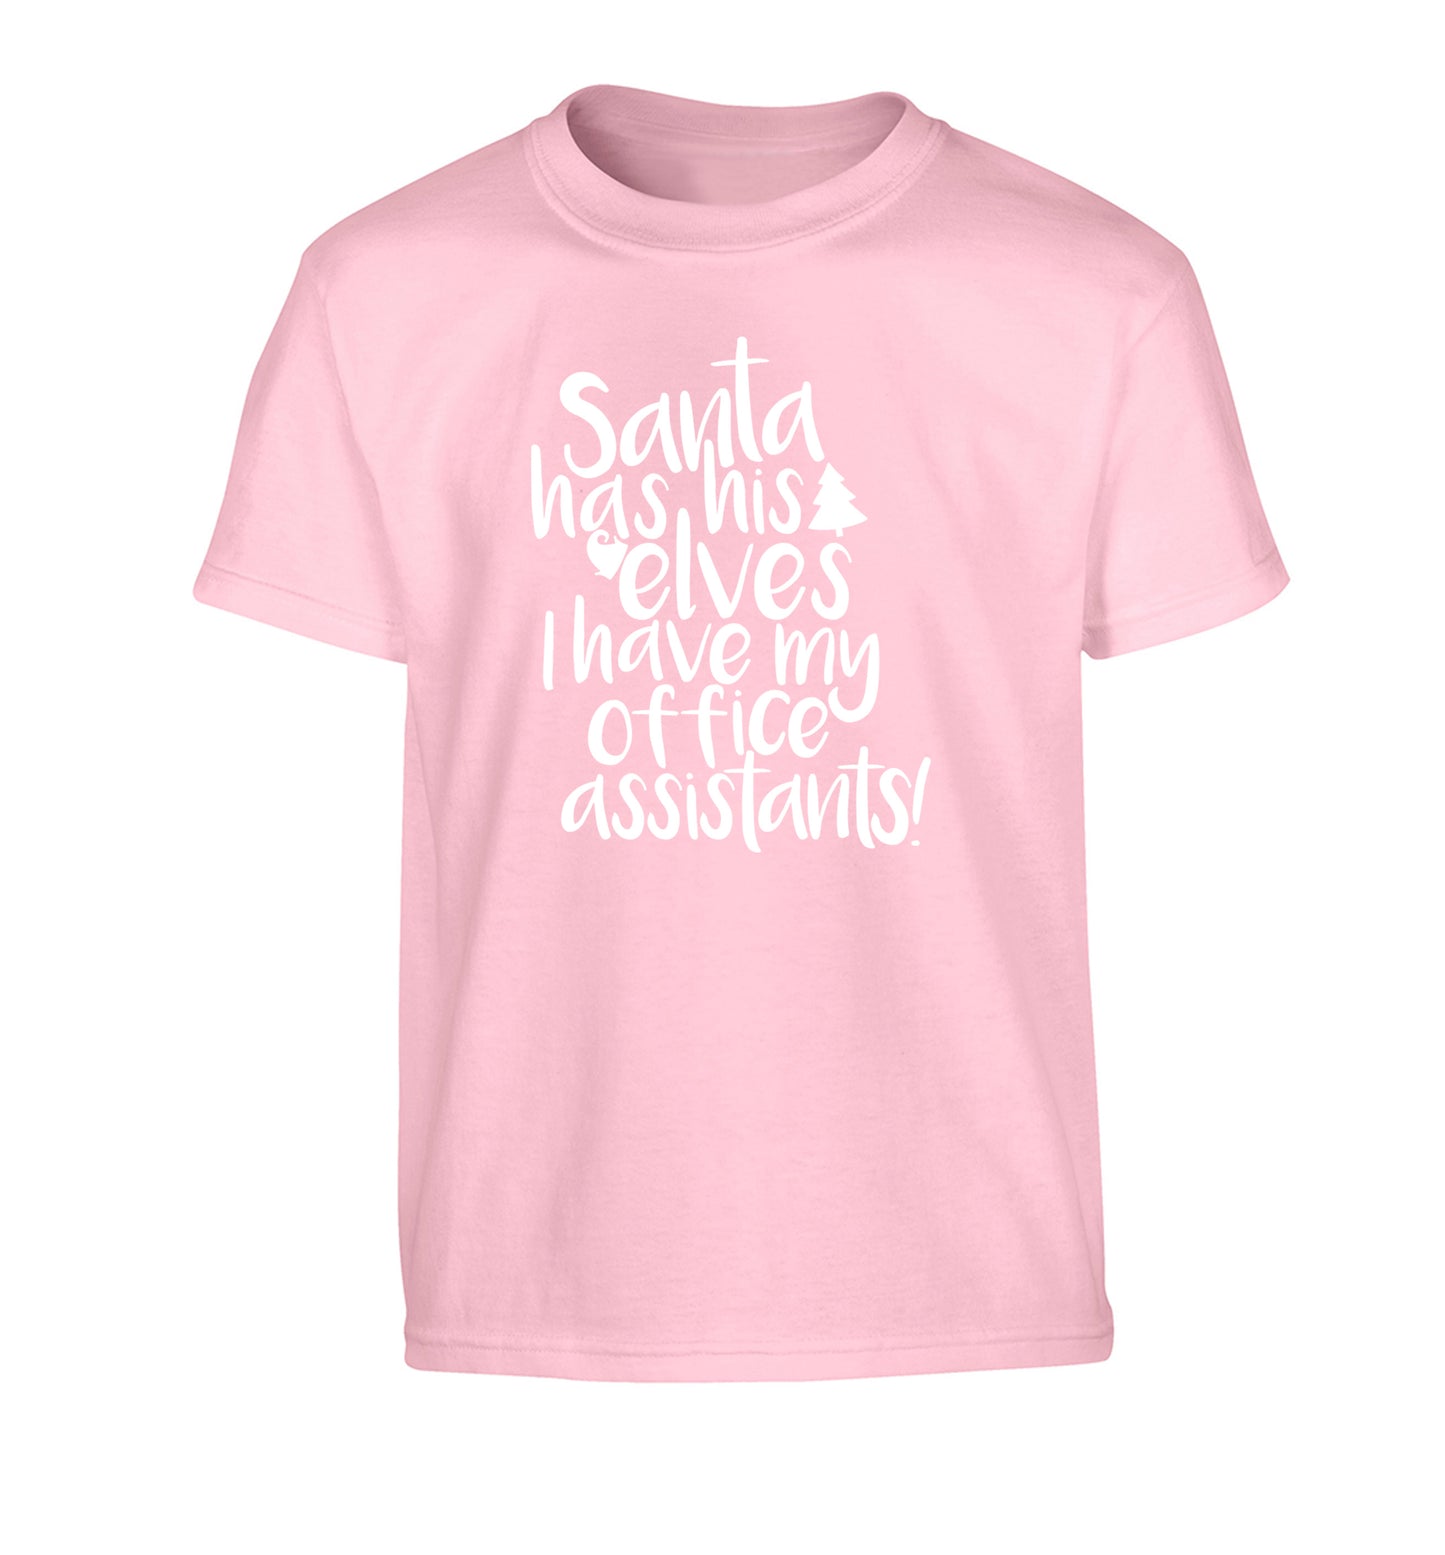 Santa has his elves I have my office assistants Children's light pink Tshirt 12-14 Years